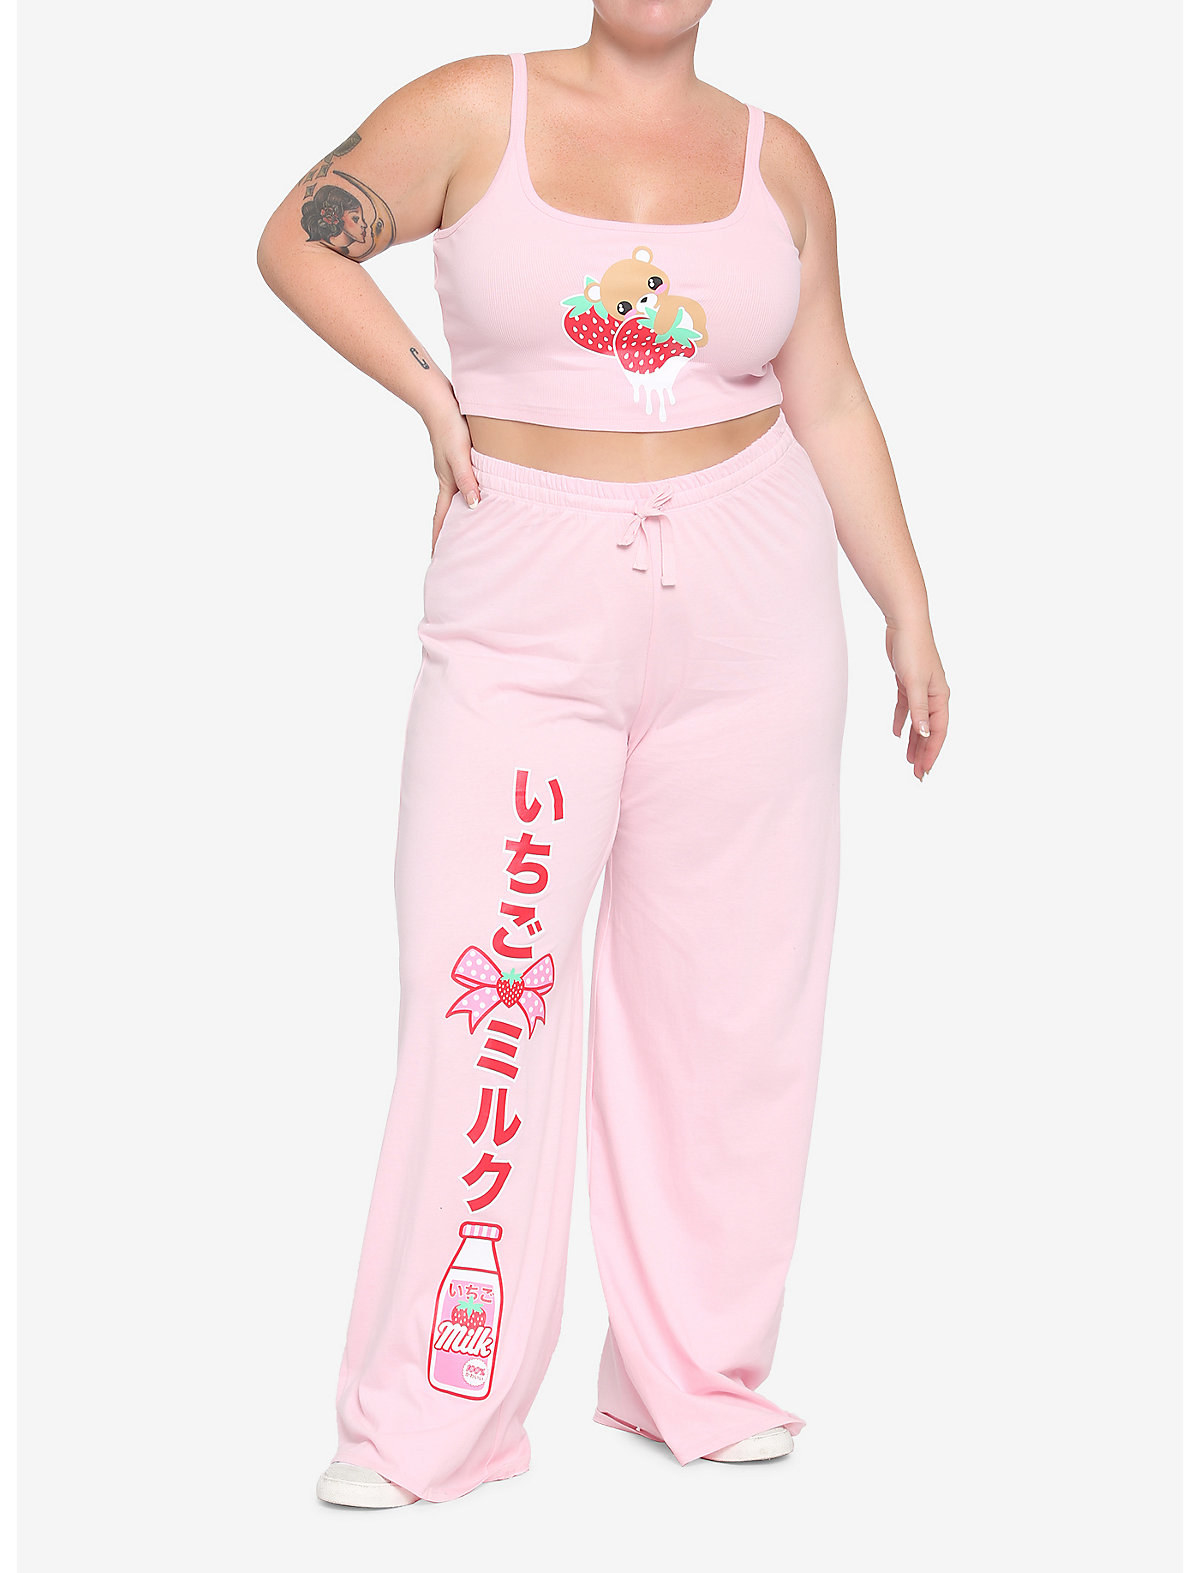 Model is wearing a light pink tank top with a teddy bear and strawberries on it and pink pants that have Japanese writing and strawberry milk